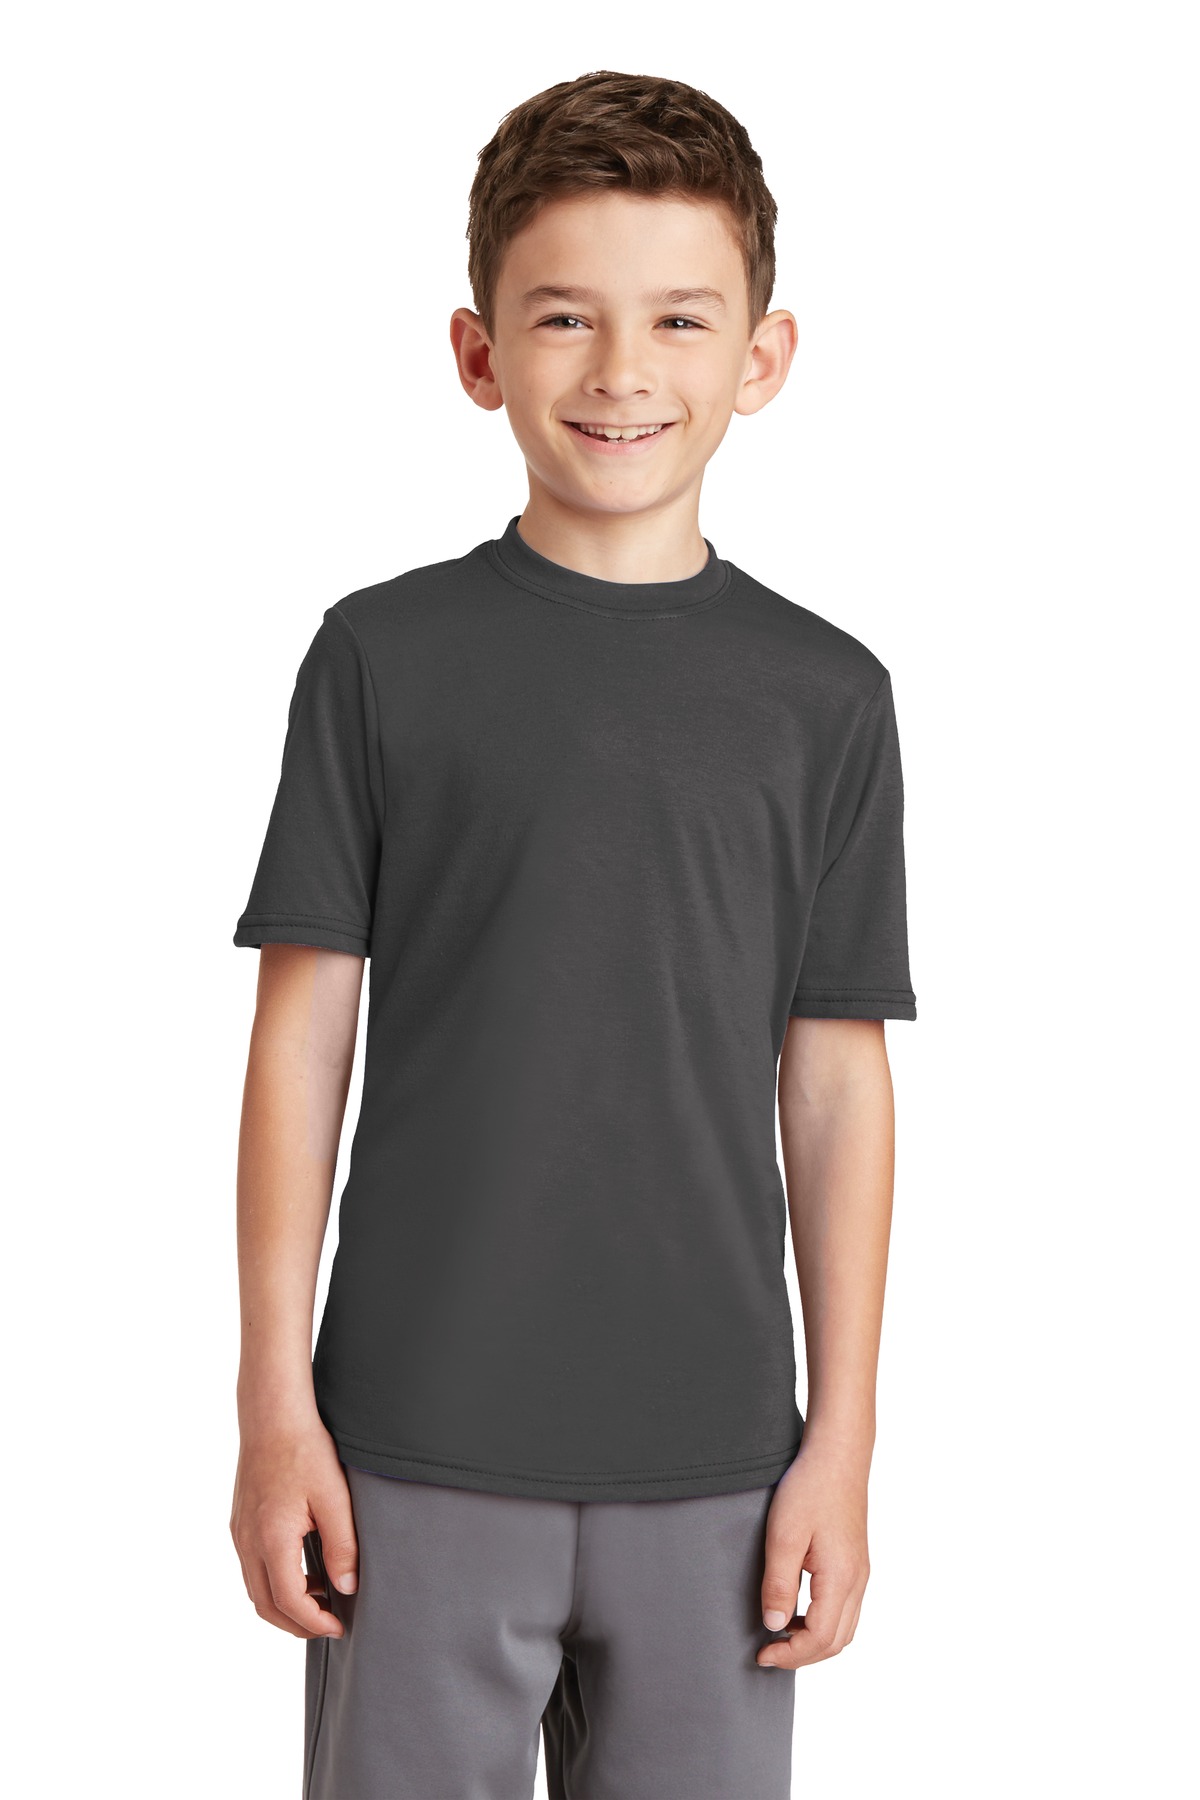 Port & Company  PC381Y - Youth Essential Blended Performance Tee